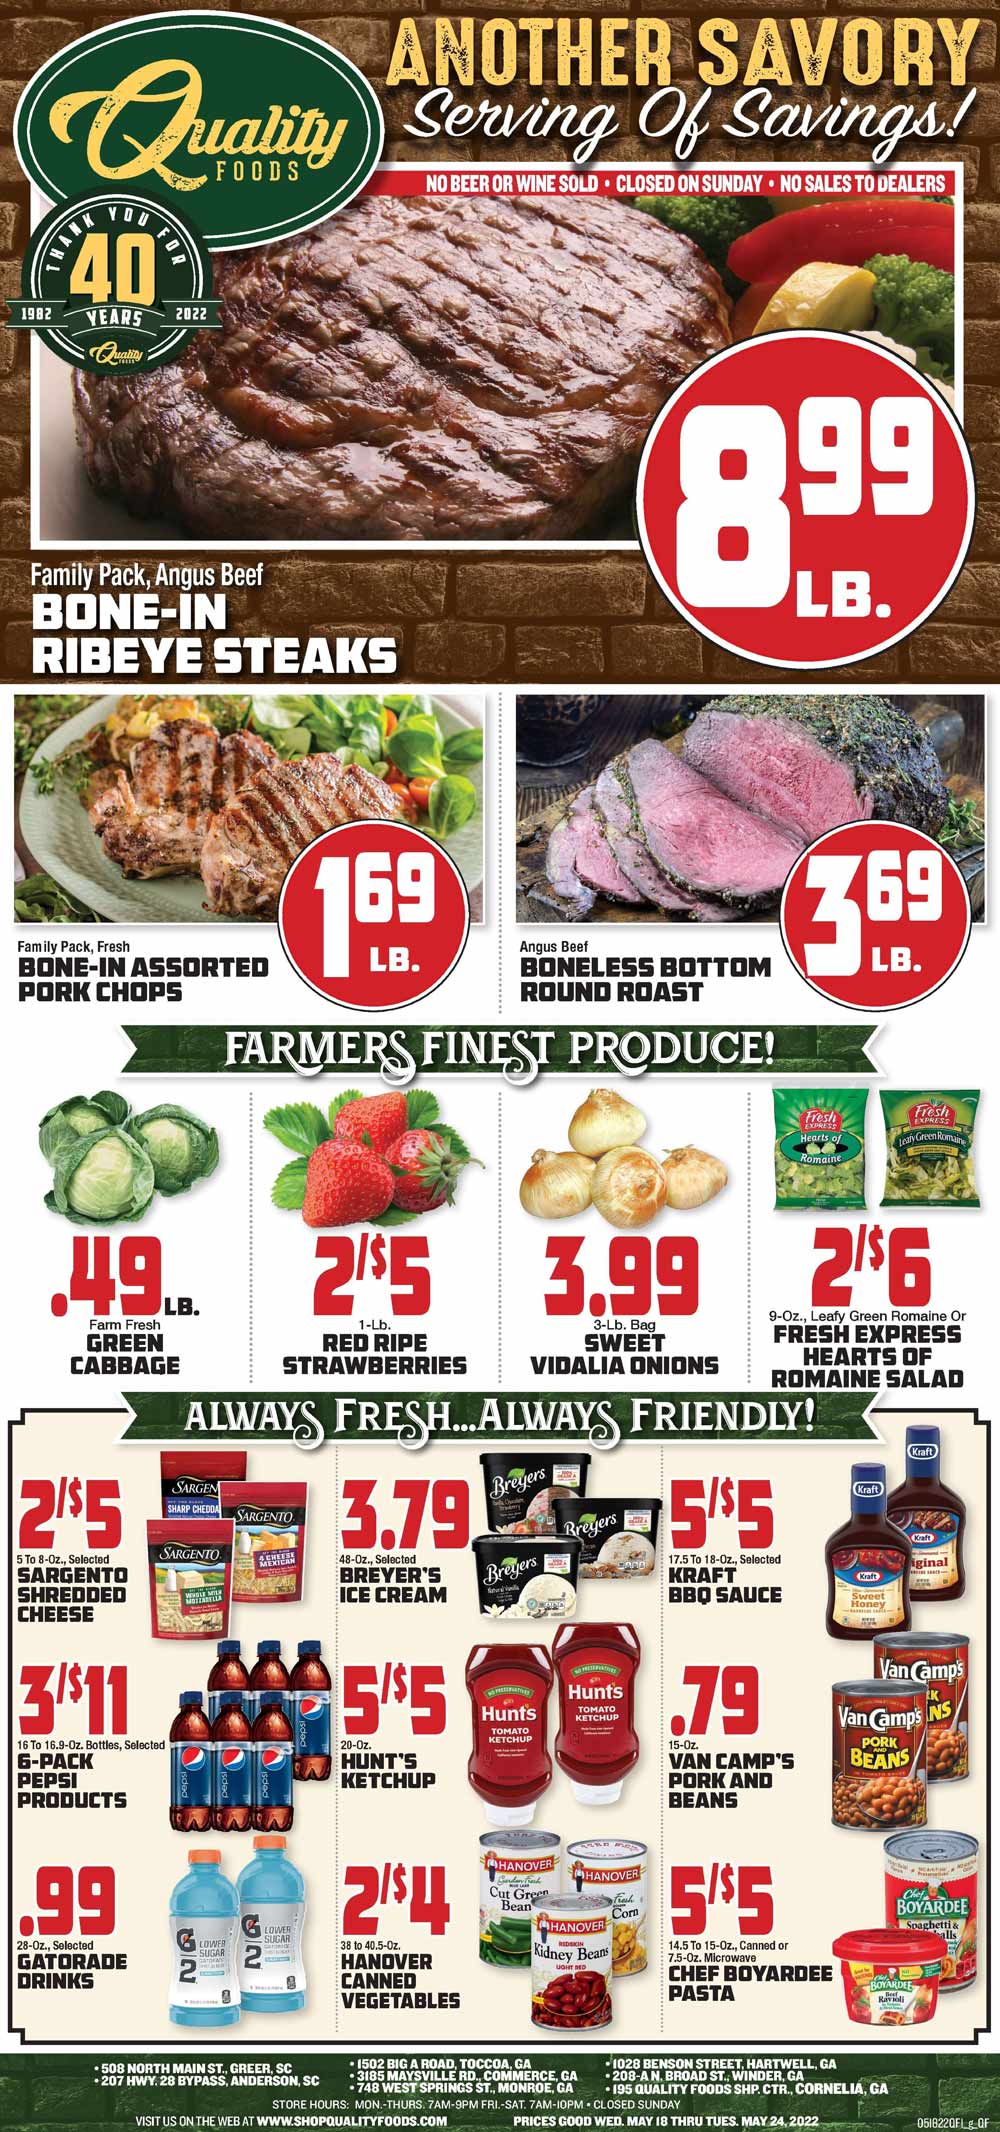 Quality Foods Weekly Ad (5/18/22 - 5/24/22)